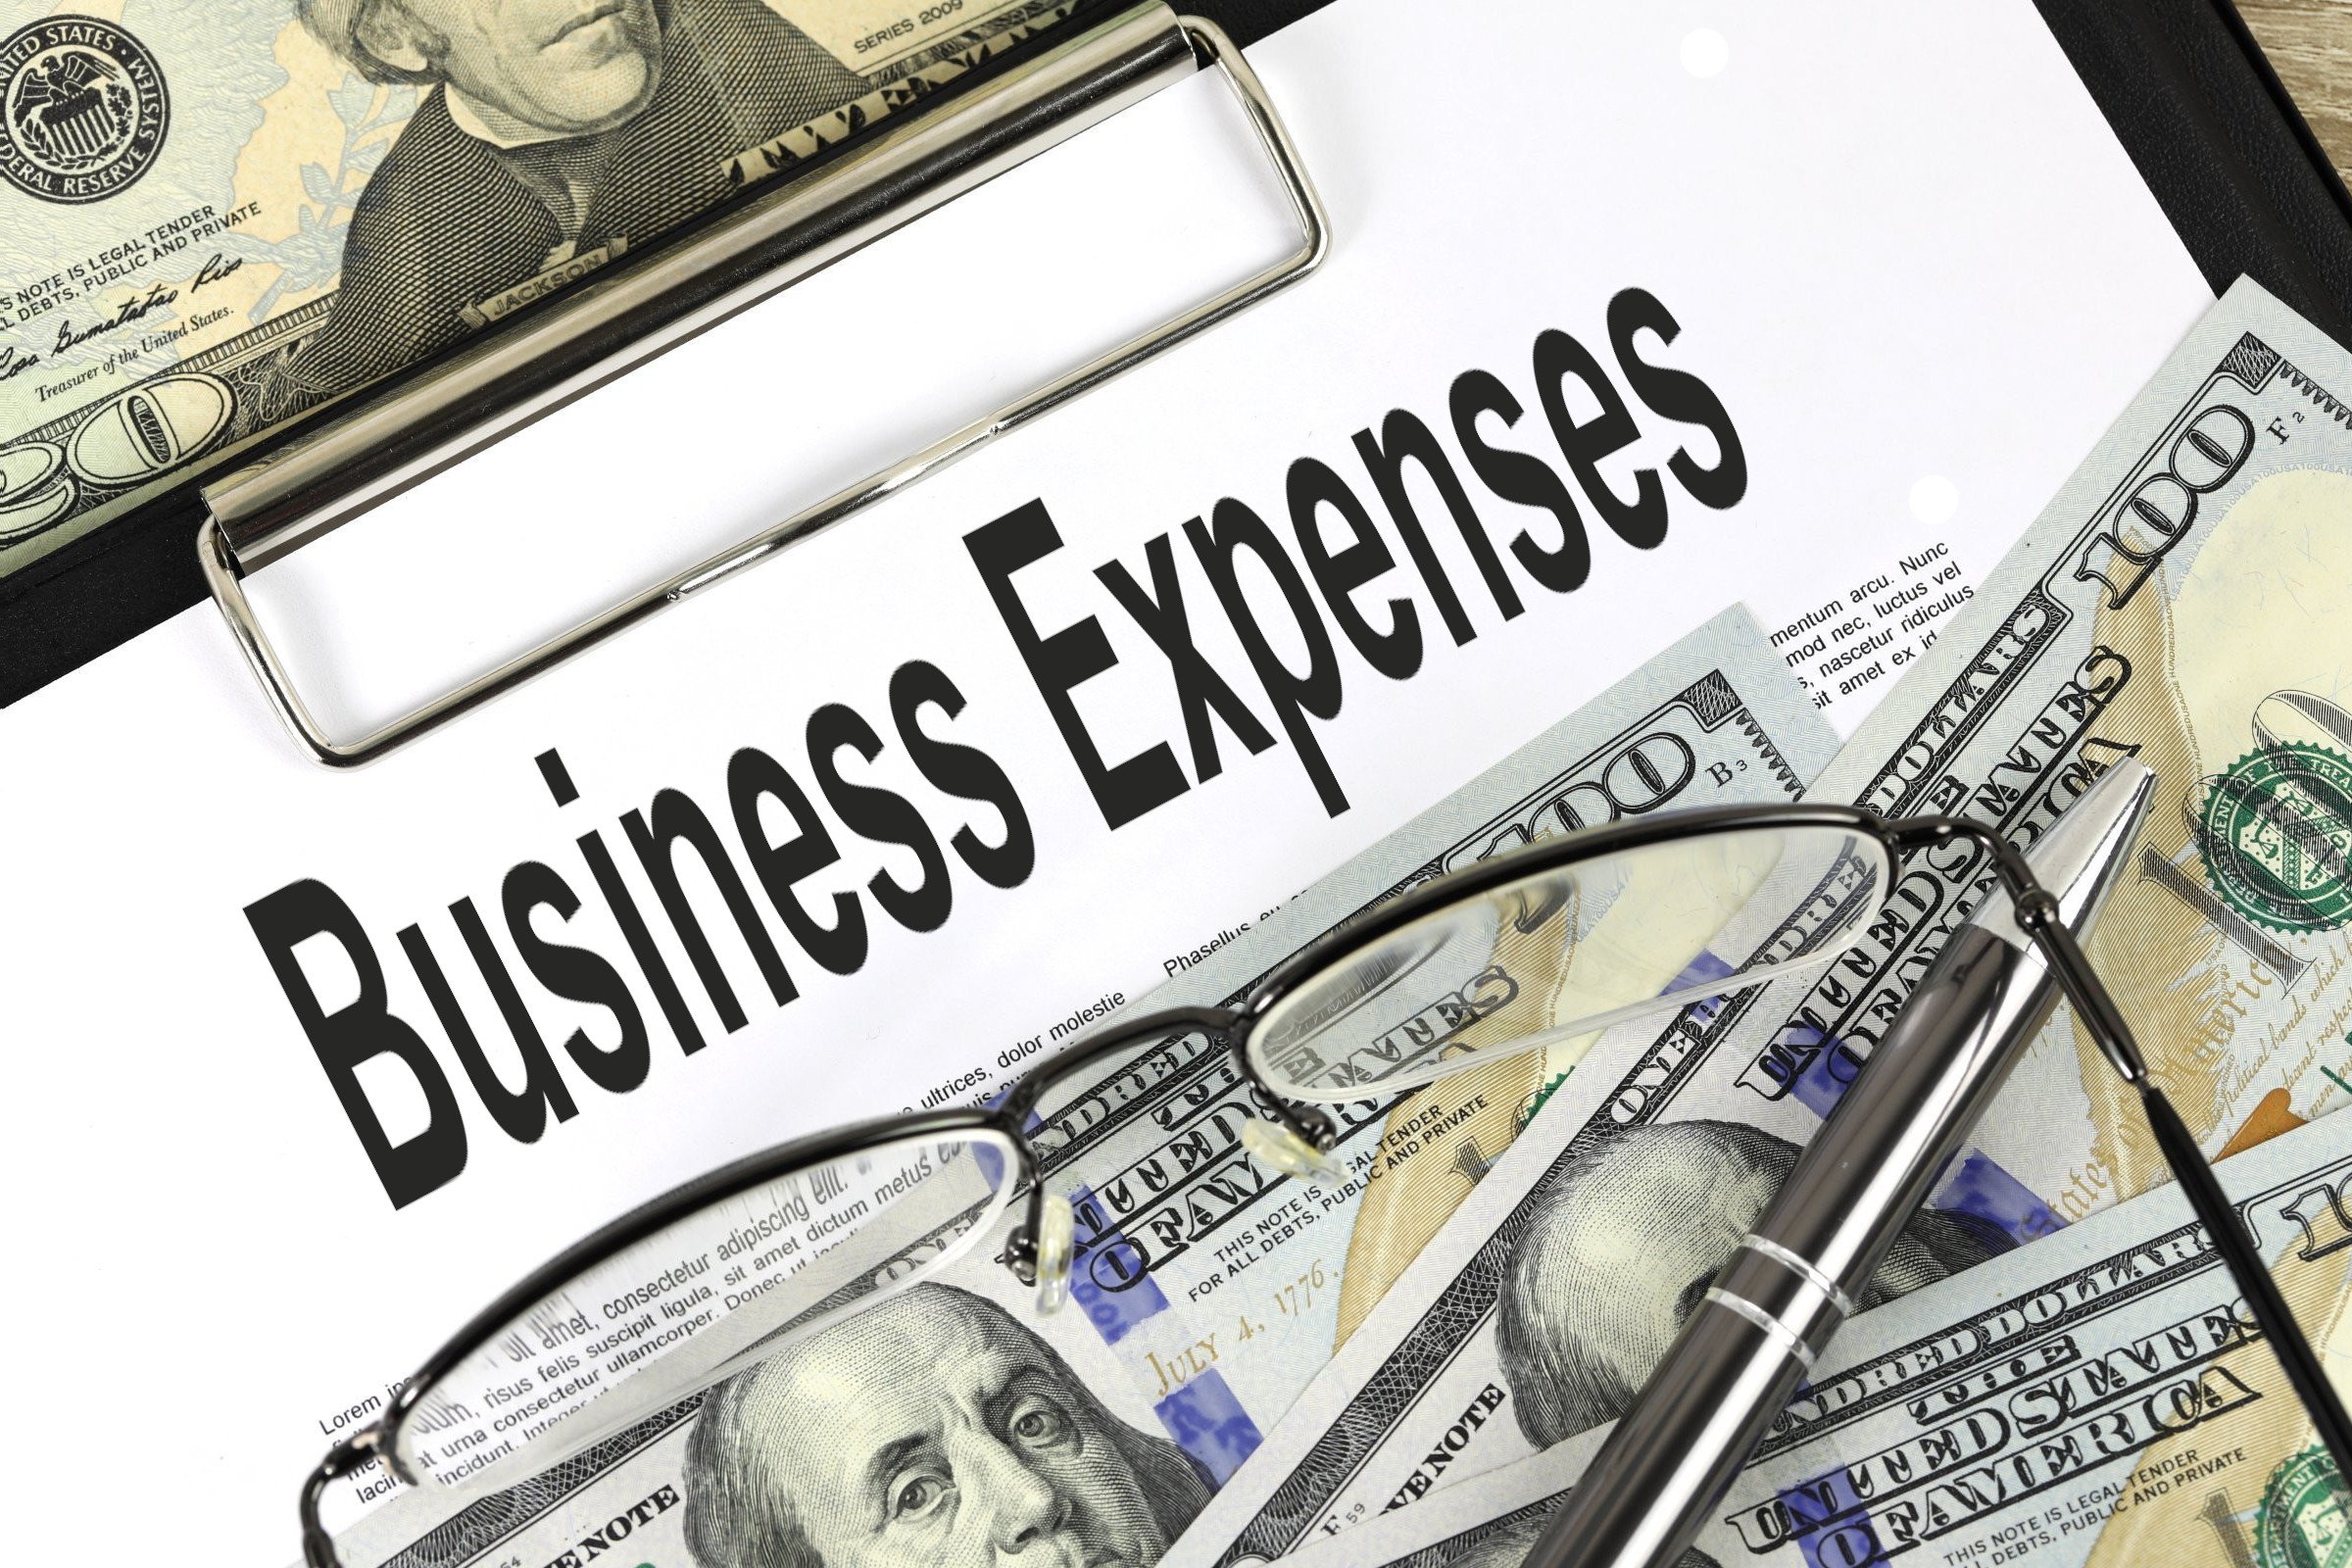 business expenses